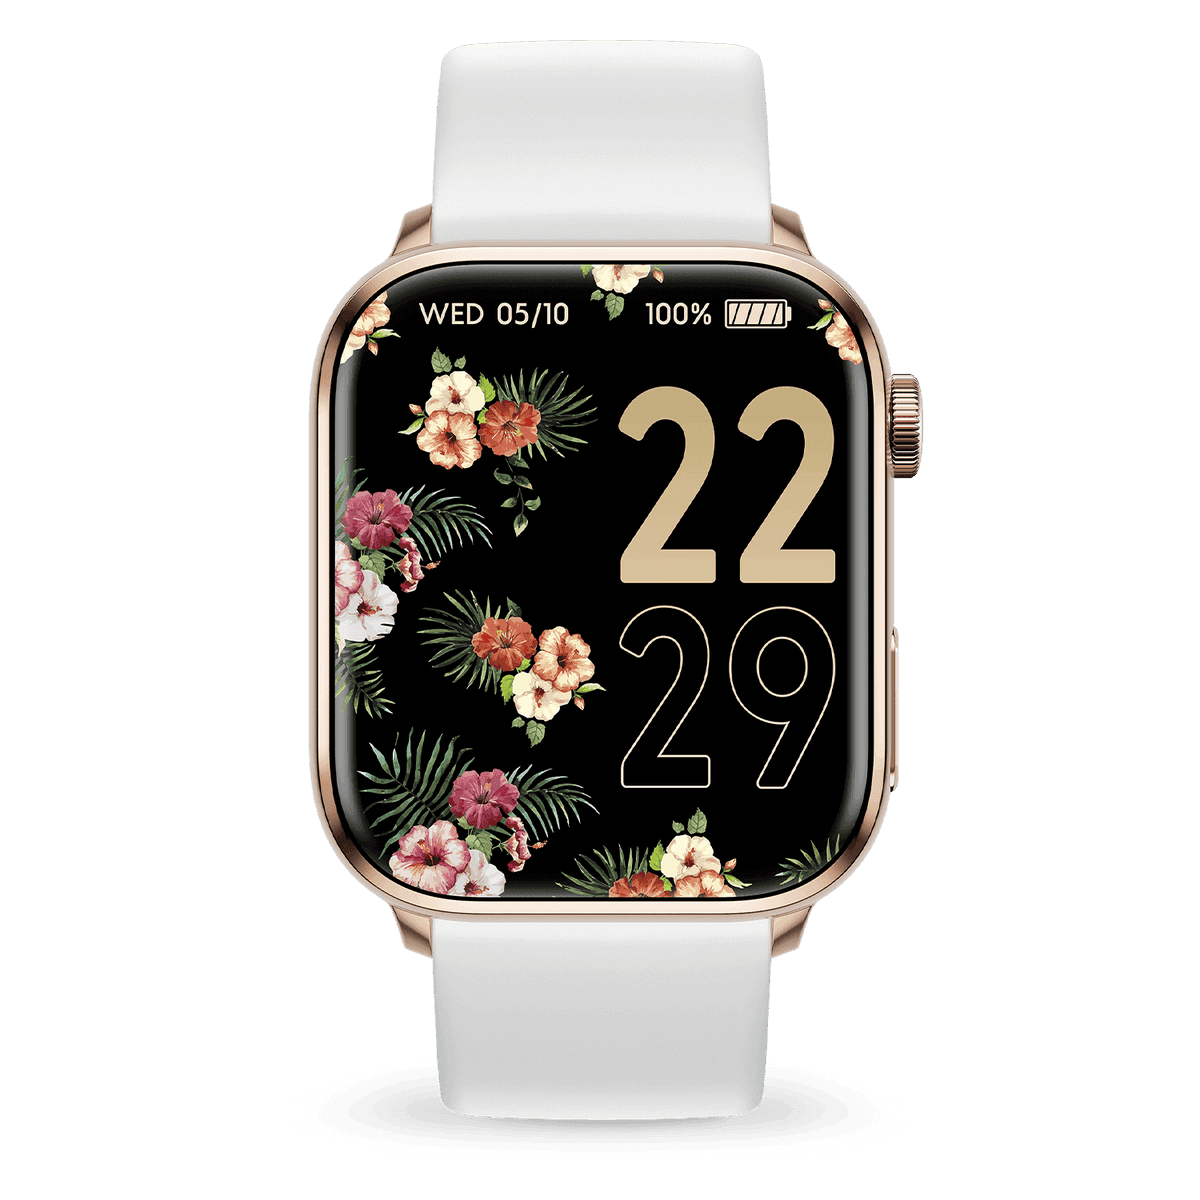 Ice Smart Two - 022537-ice-smart-two-rose-gold-white-01_5a8c7dad-75c0-4ba4-8c74-827f874d53e5